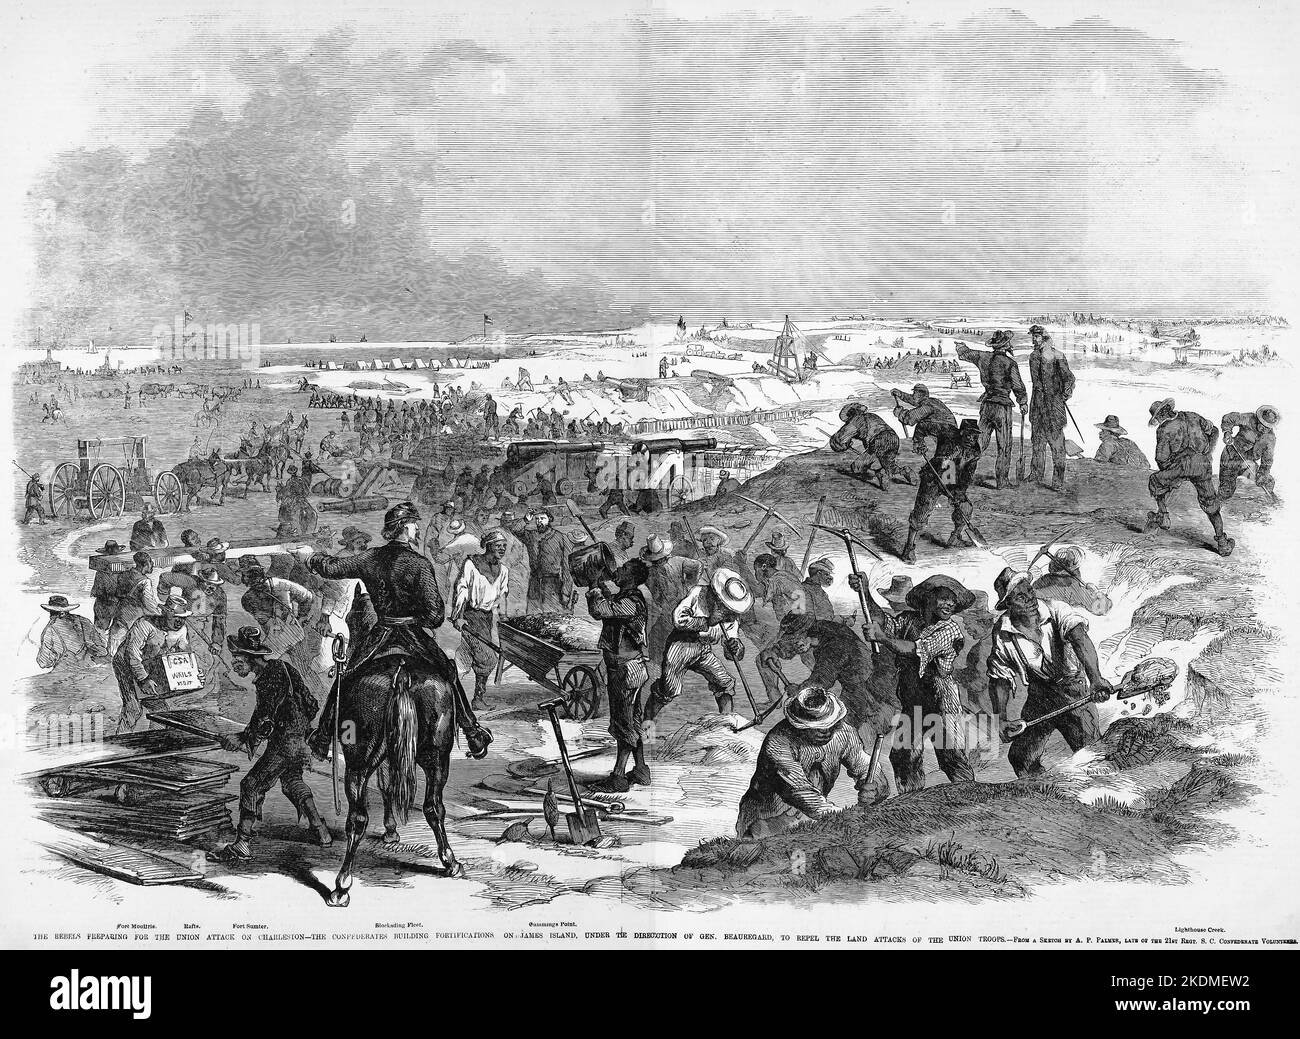 The Rebels preparing for the Union attack on Charleston, South Carolina - The Confederates building fortifications on James Island, under the direction of General P. G. T. Beauregard, to repel the land attacks of the Union troops. January 1863. 19th century American Civil War illustration from Frank Leslie's Illustrated Newspaper Stock Photo